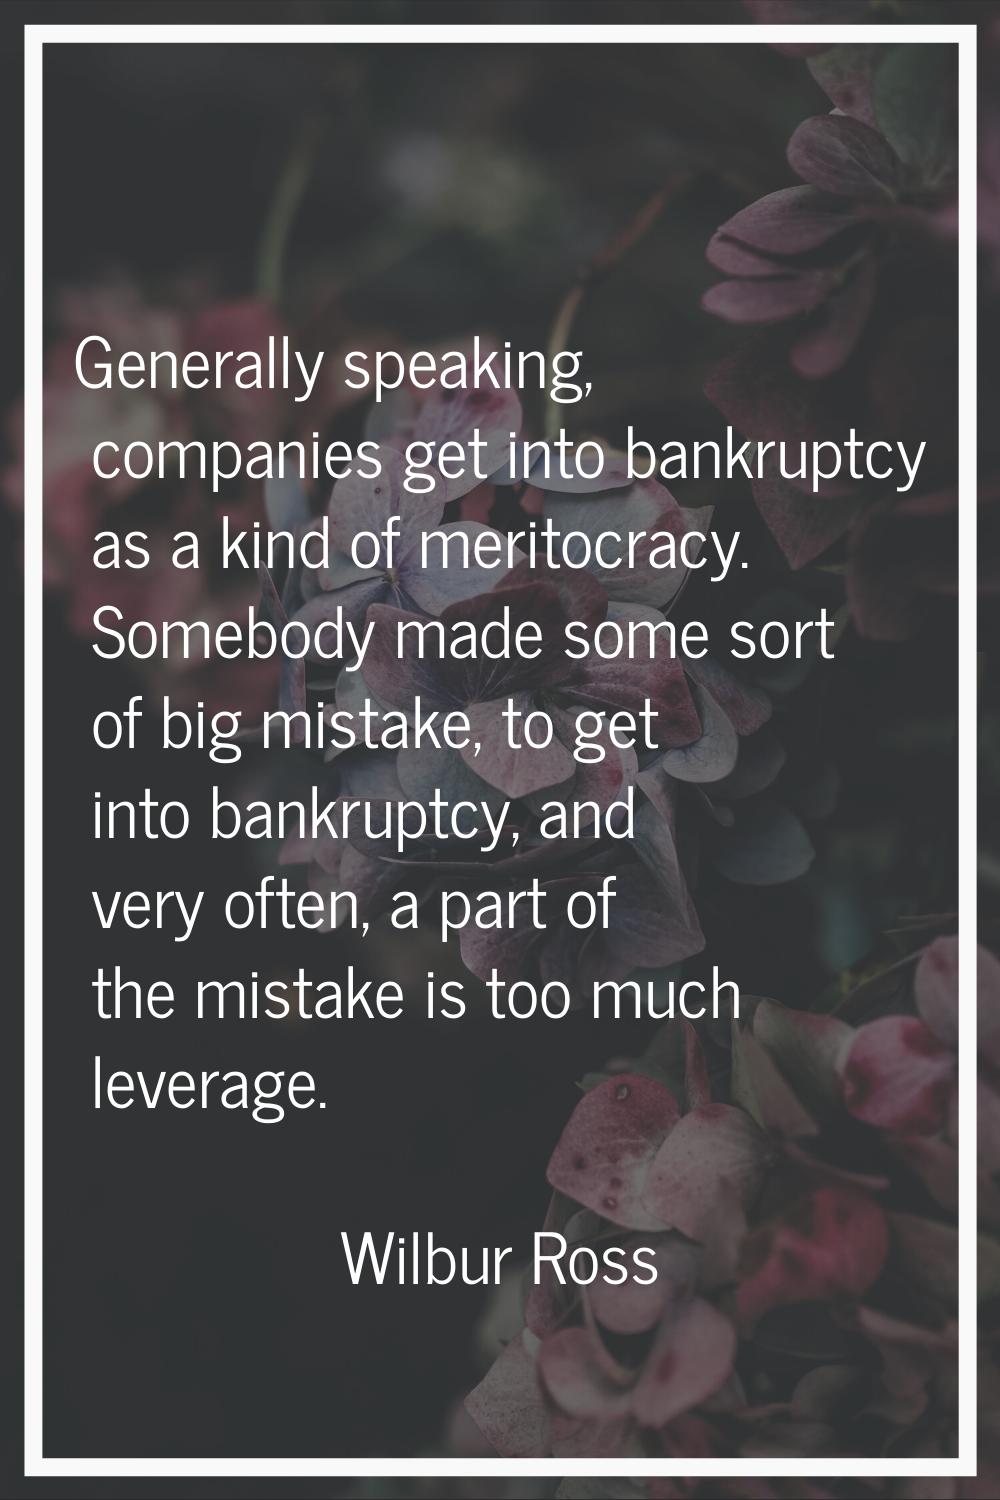 Generally speaking, companies get into bankruptcy as a kind of meritocracy. Somebody made some sort